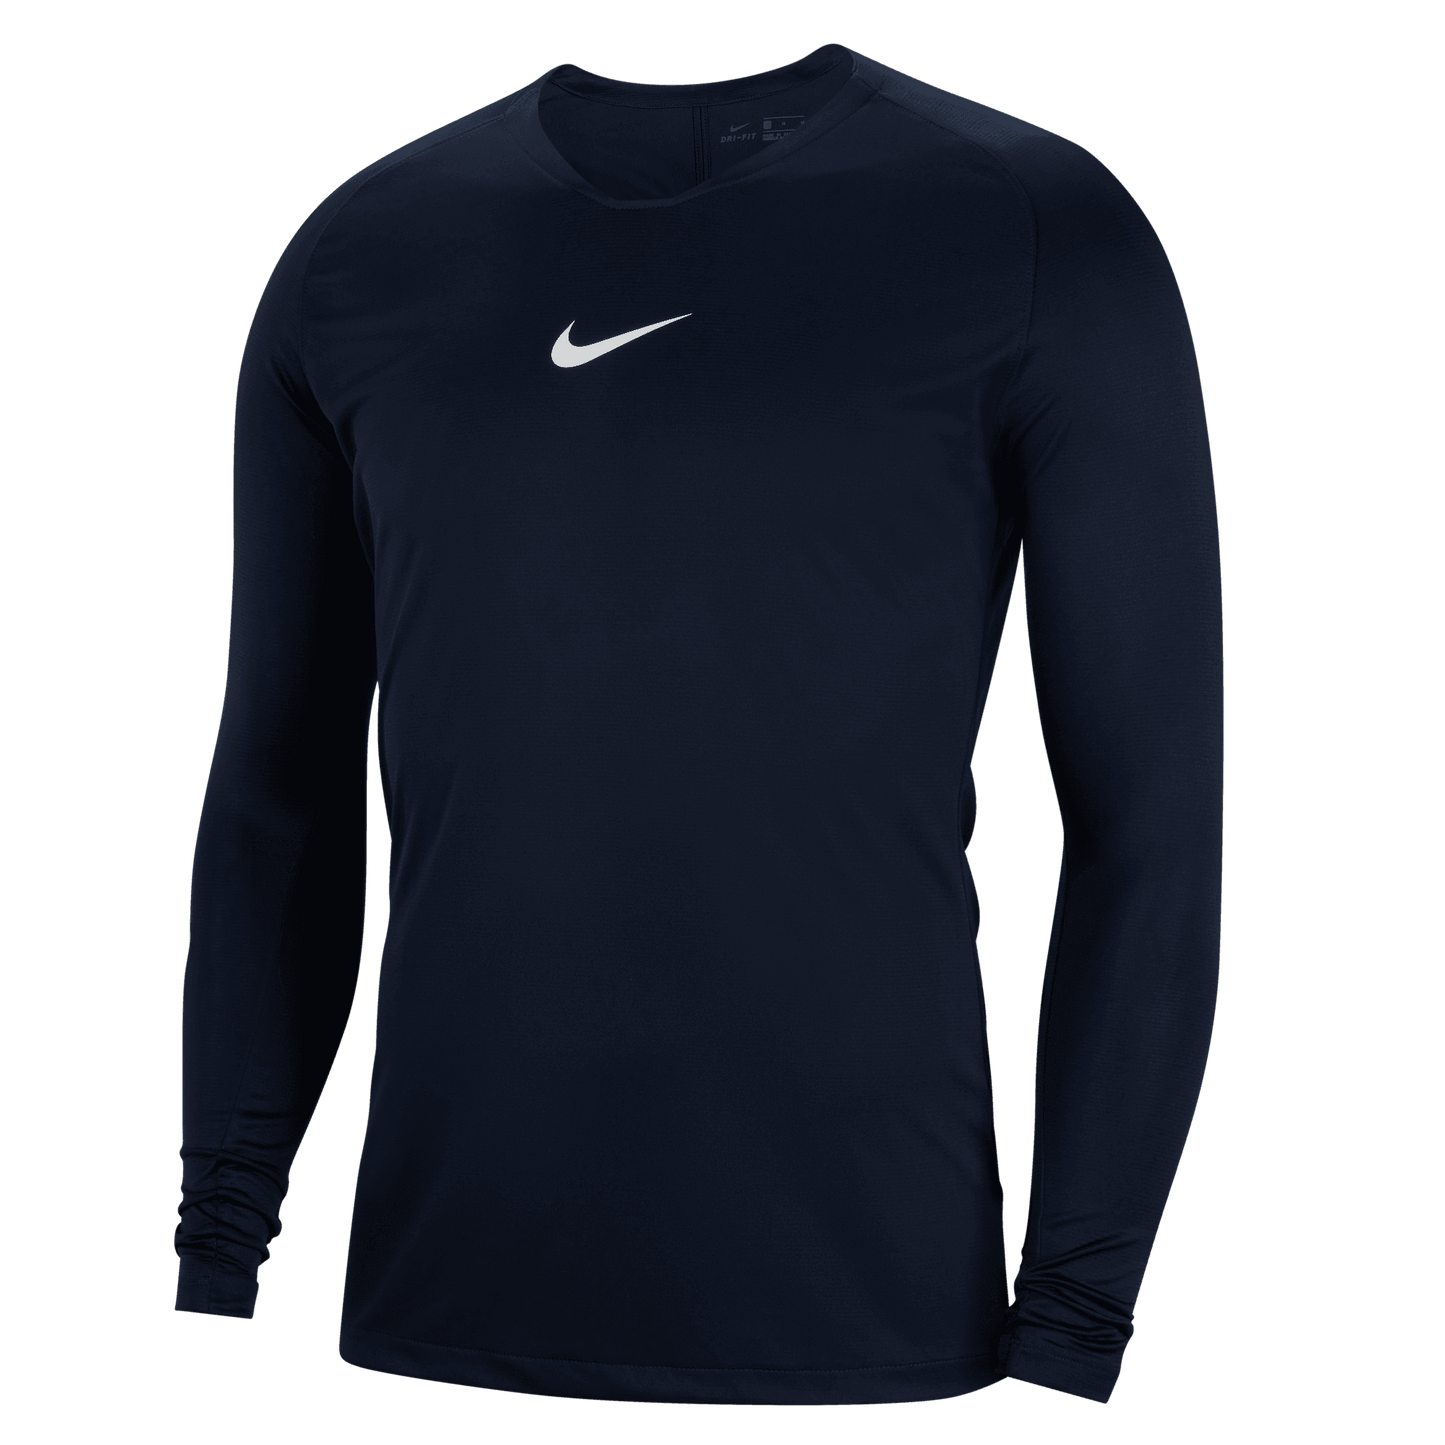 NIKE PARK FIRST LAYER - YOUTH'S